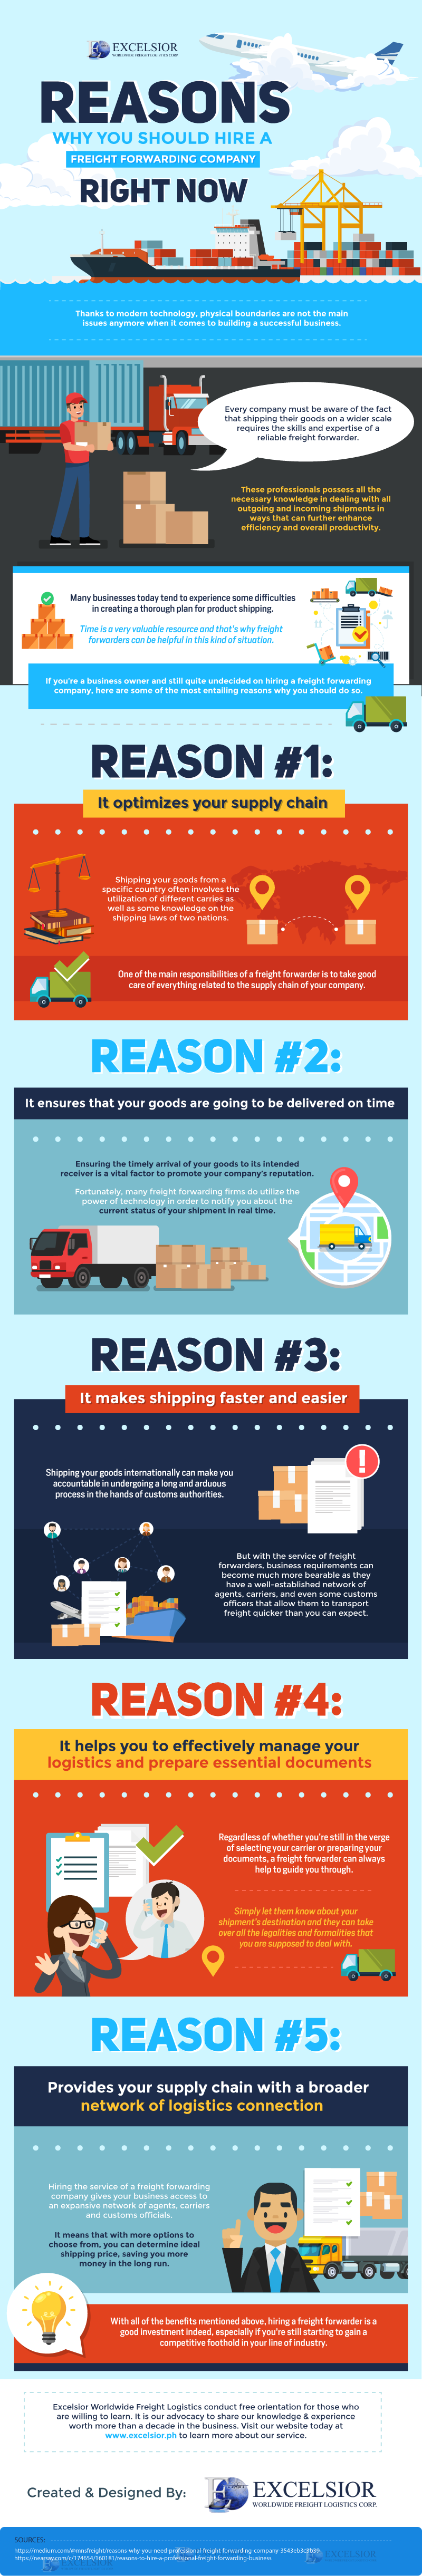 Reasons Why You Should Hire a Freight Forwarding Company Right Now